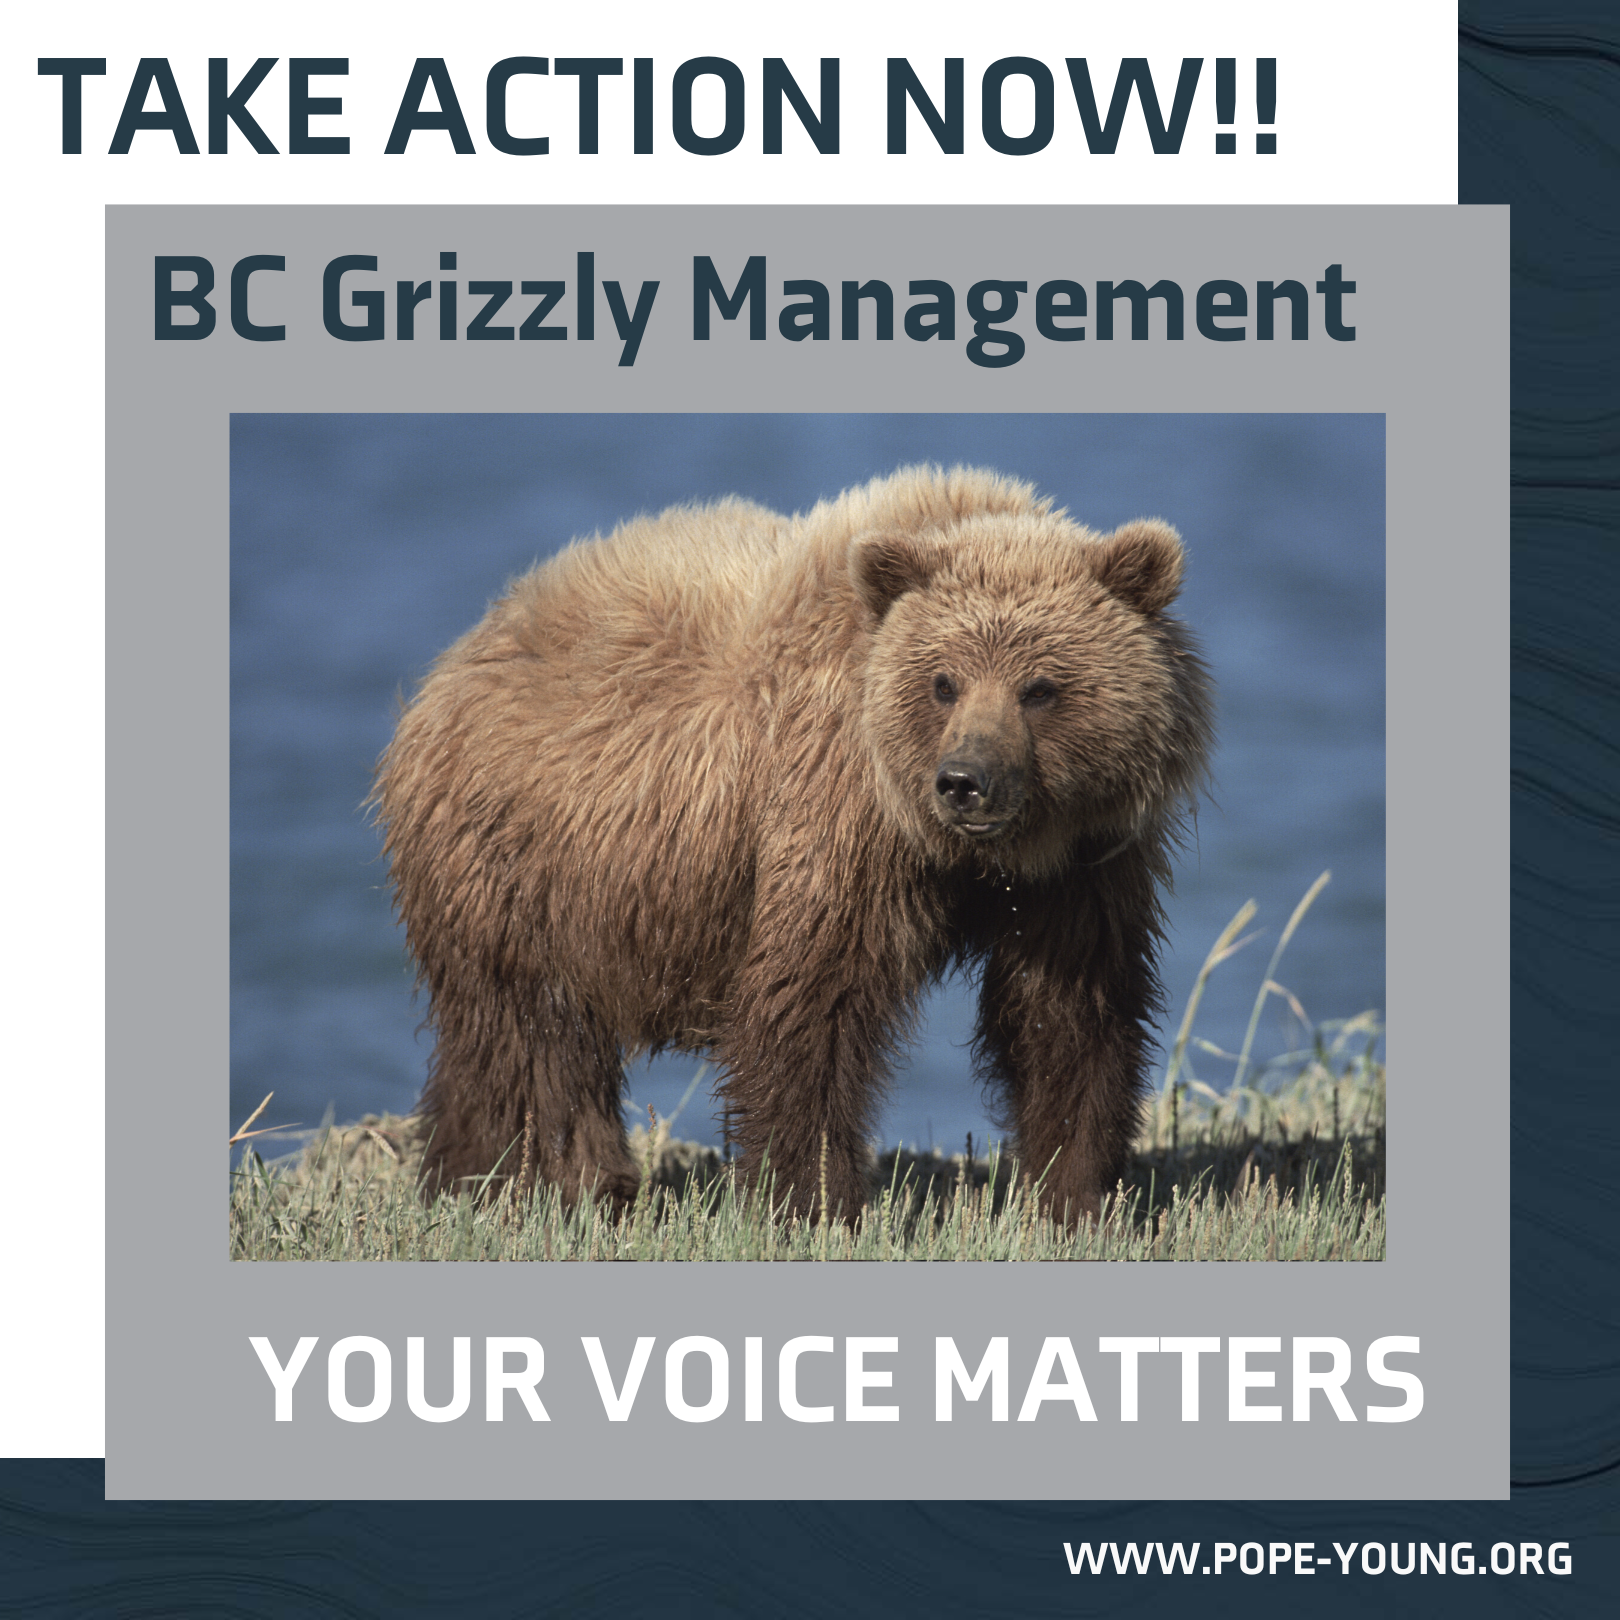 
POPE AND YOUNG ACTION ALERT – BC GRIZZLY MANAGEMENT